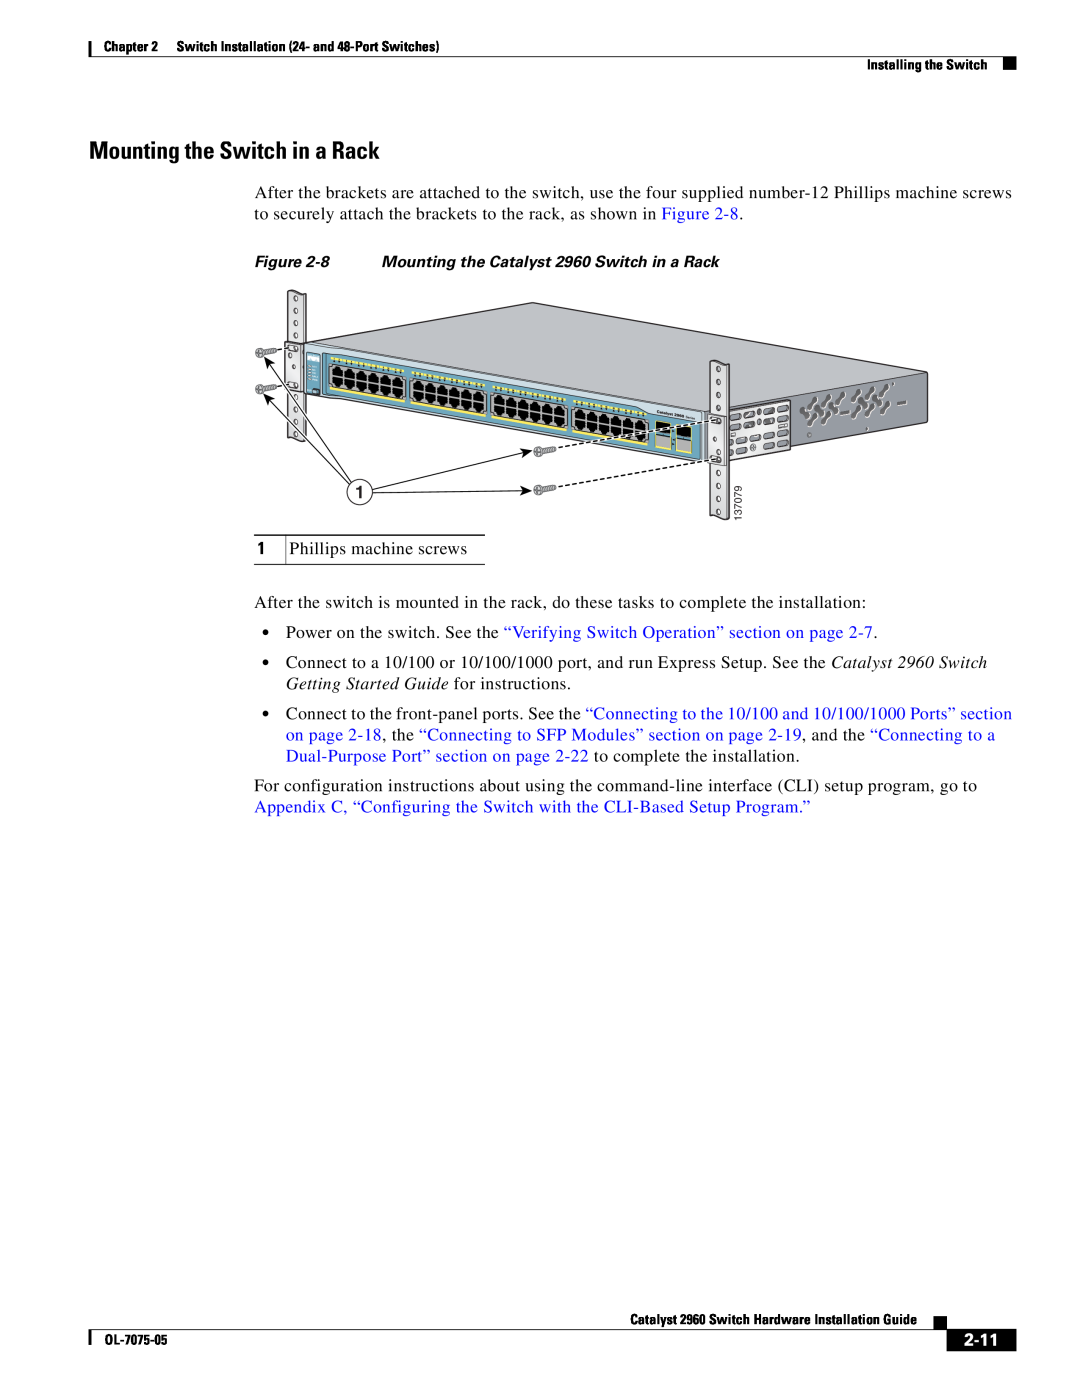 Cisco Systems 2960 specifications Mounting the Switch in a Rack, 2-11 